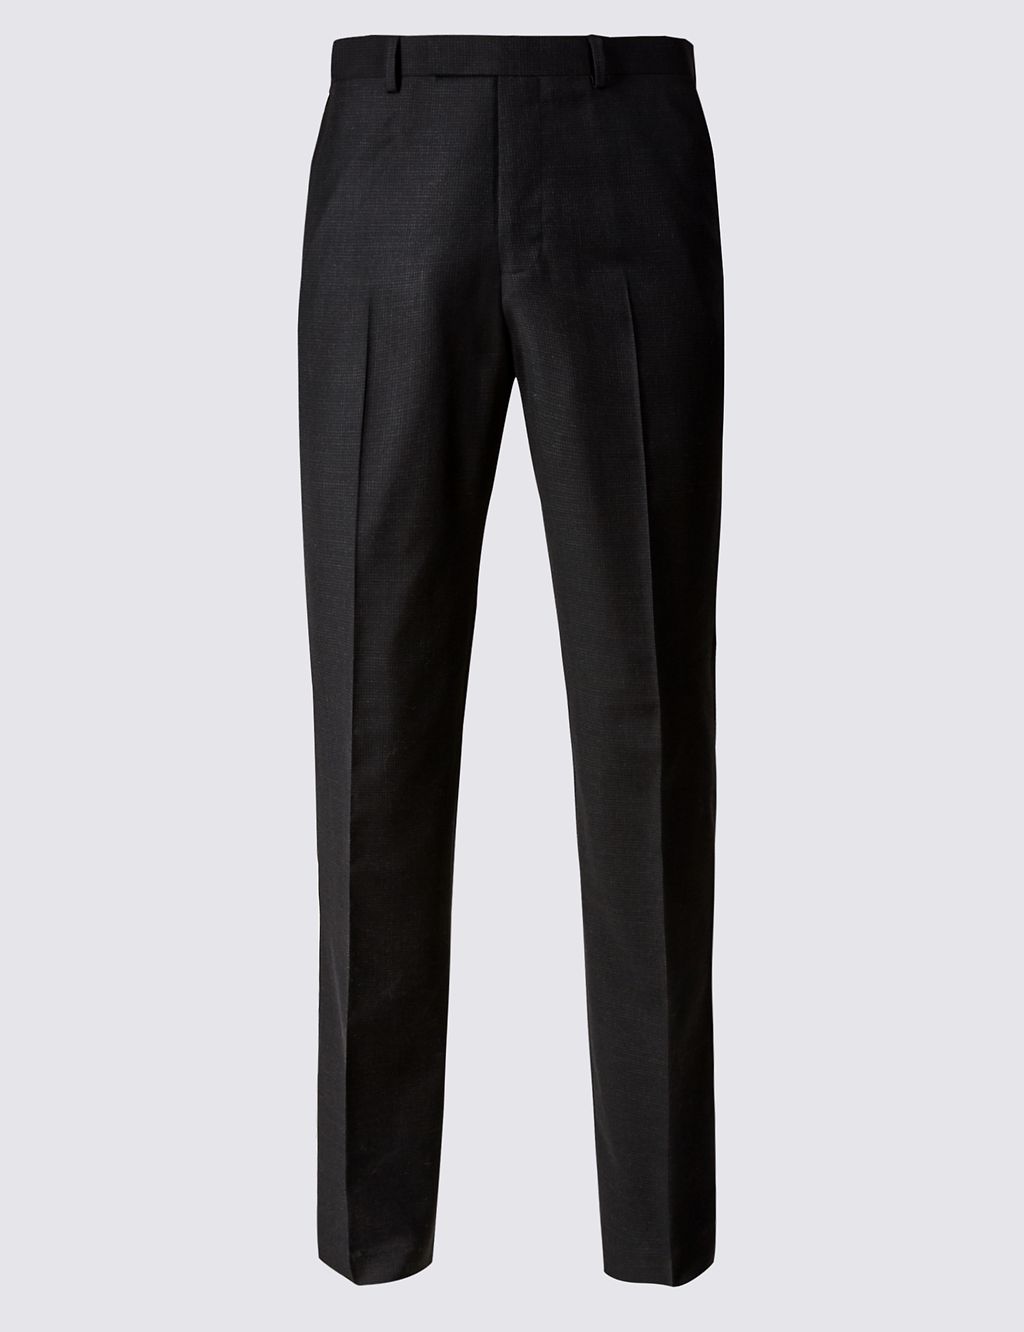 Charcoal Textured Regular Fit Wool Trousers 1 of 5